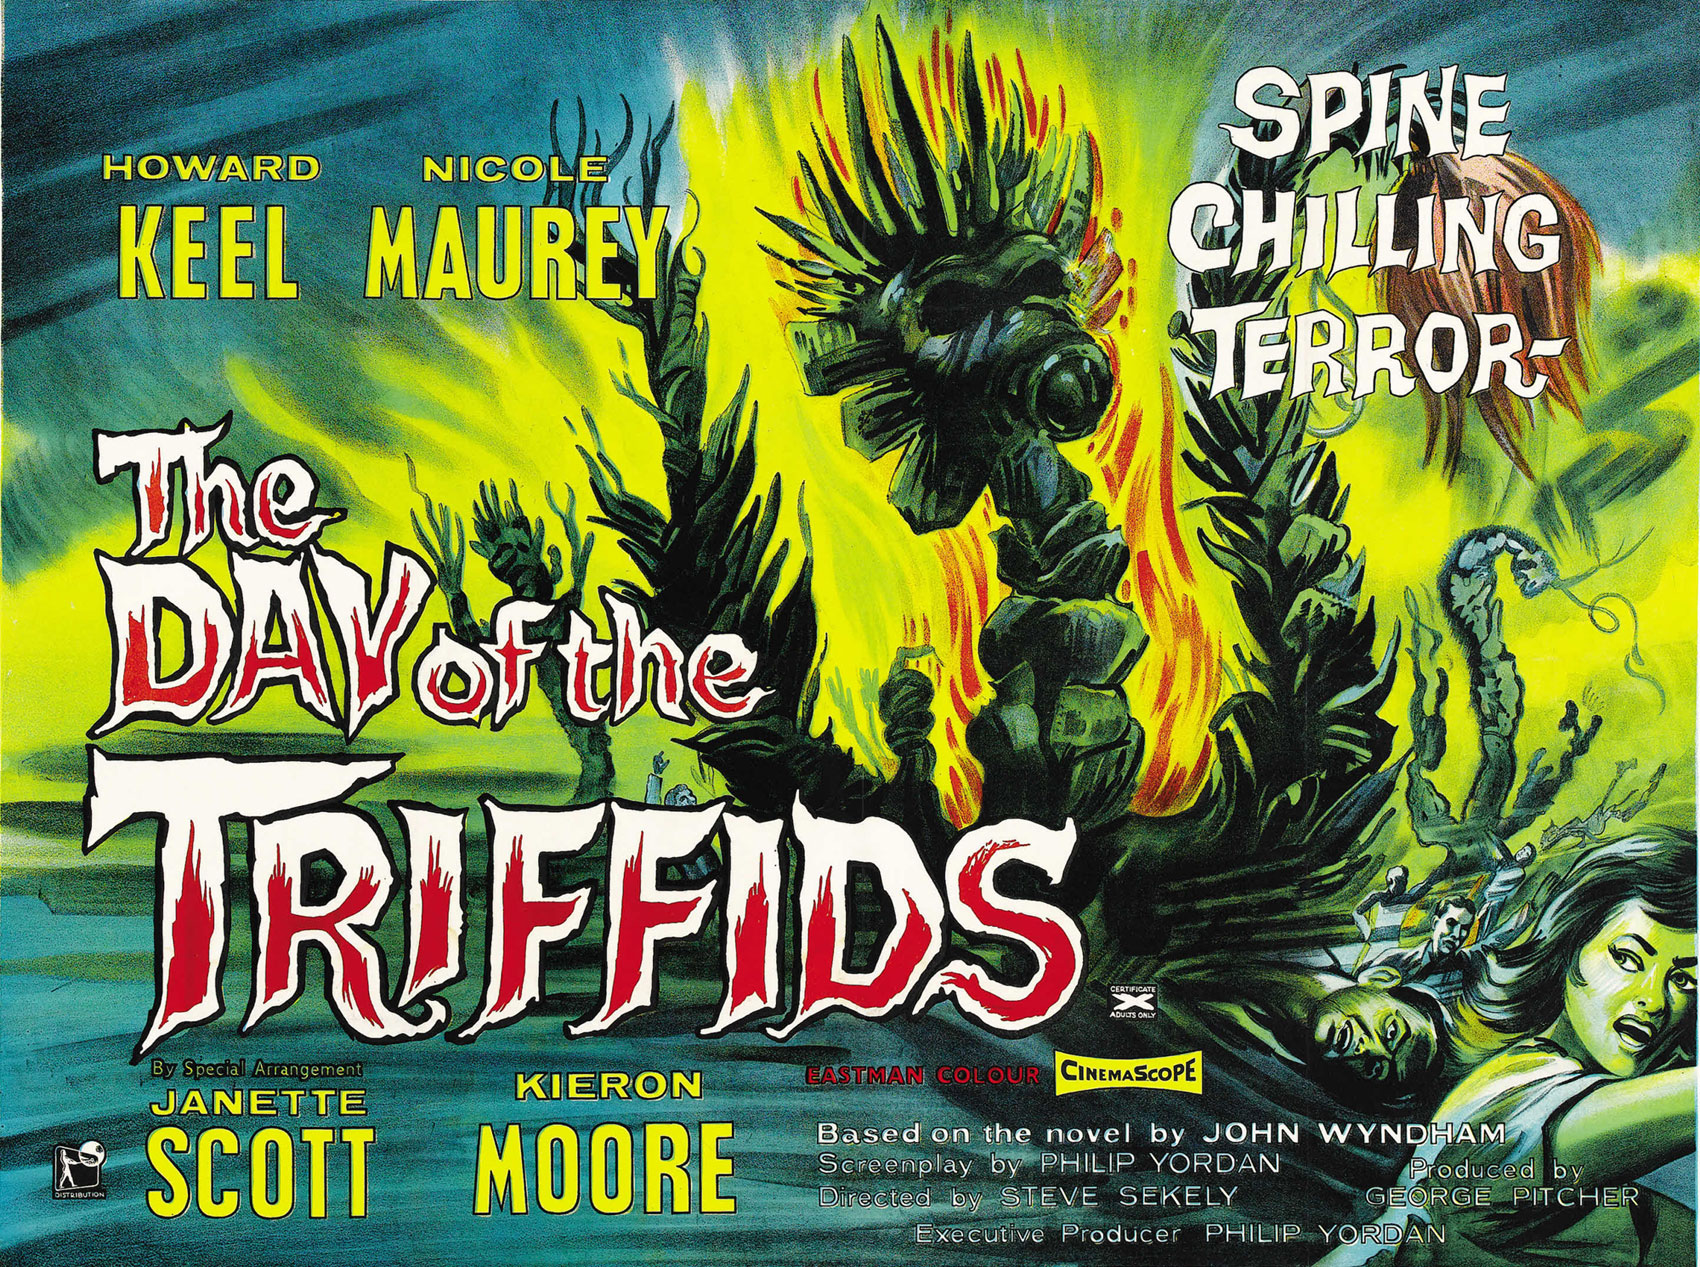 day_of_triffids_poster_02.jpg